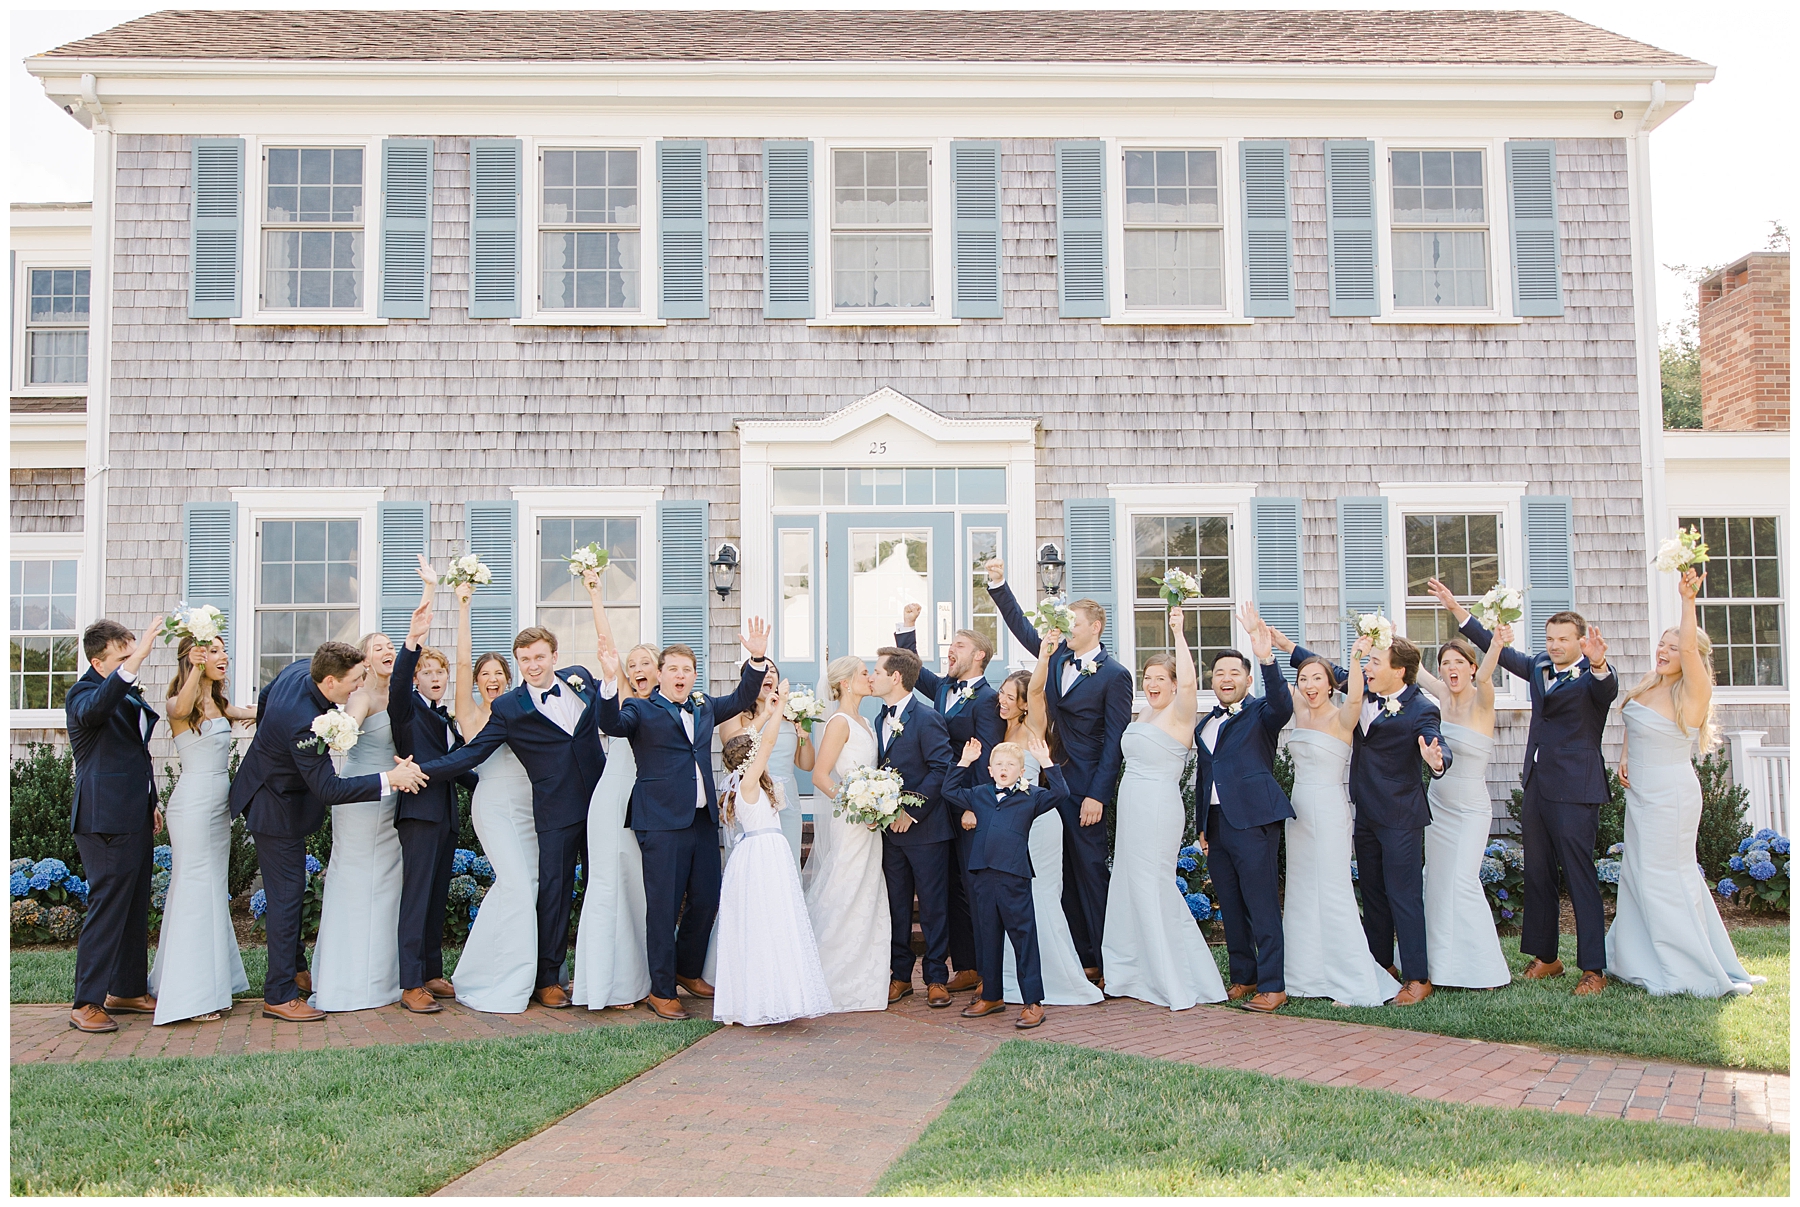 wedding party portraits from Dreamy Cape Cod Wedding at The Dennis Inn